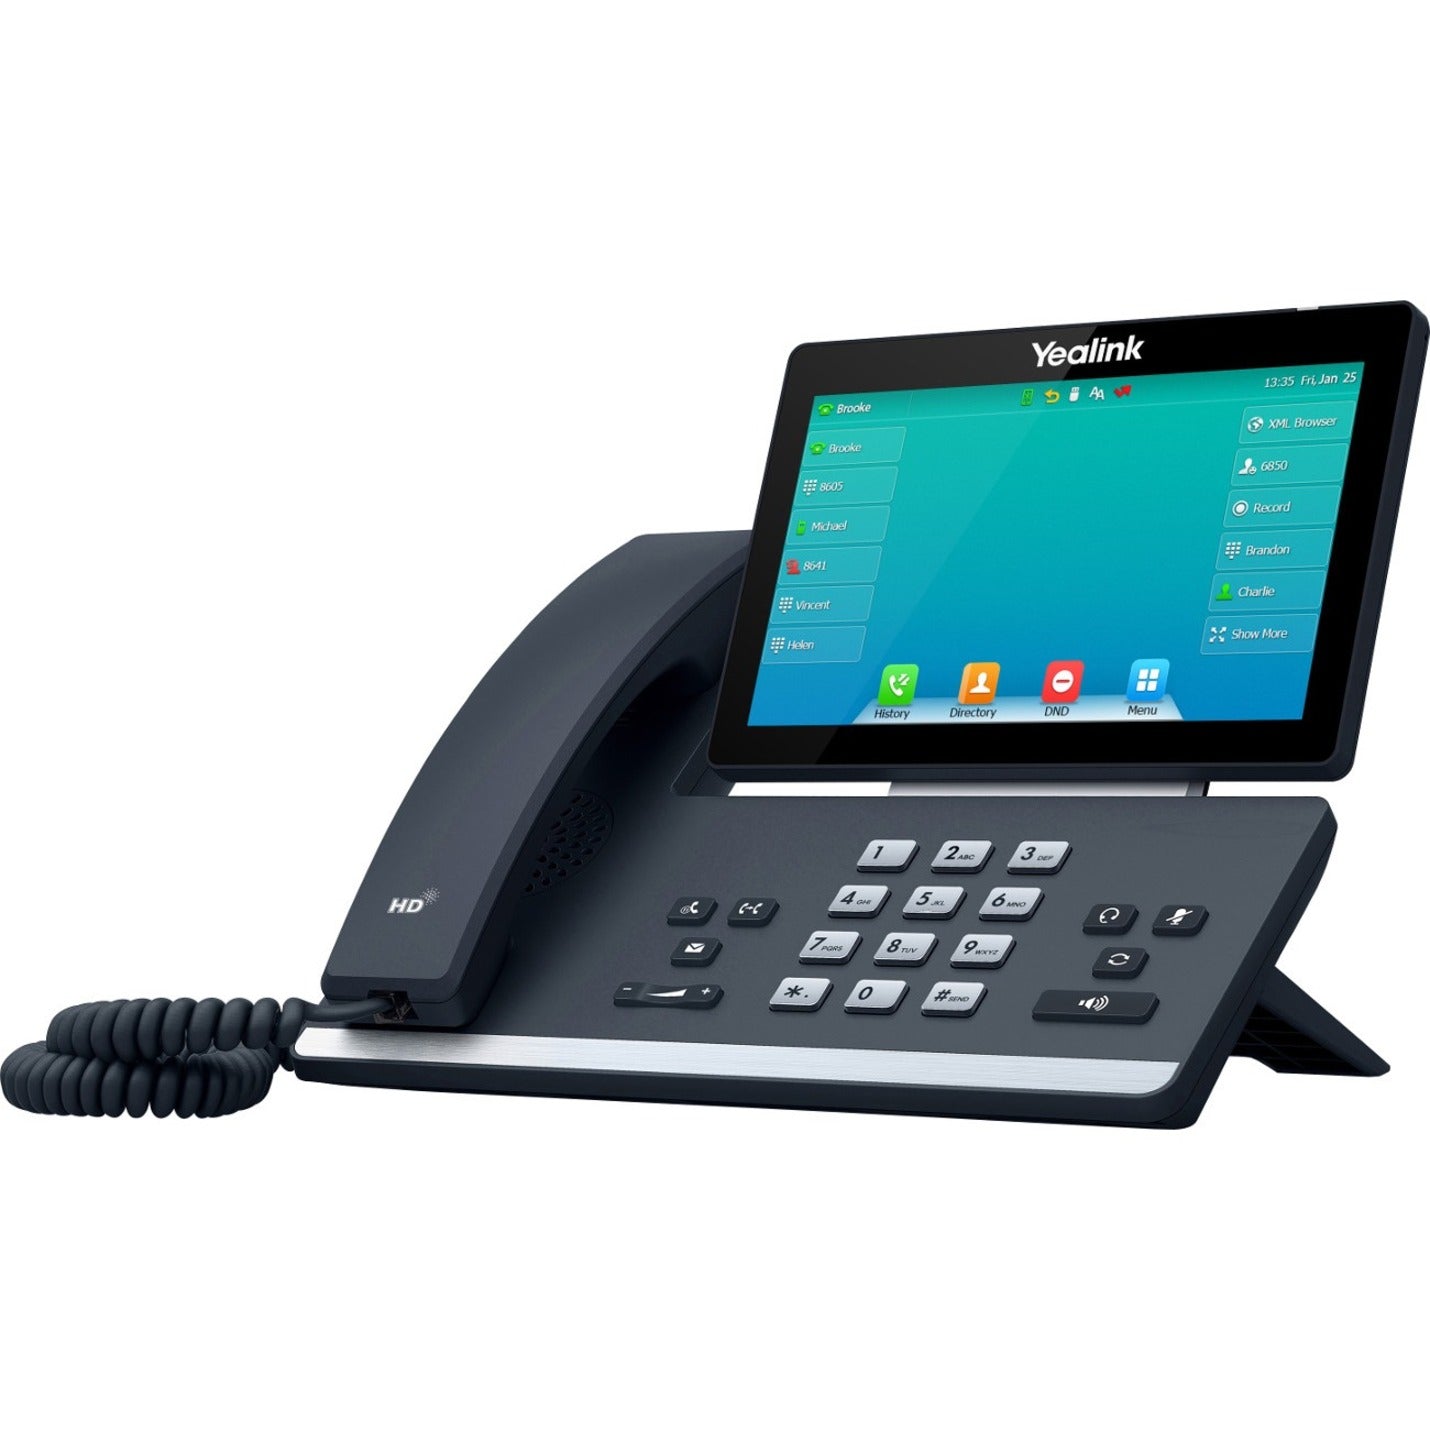 Yealink SIP-T57W Prime Business Phone with 7inch Multi-Point Touch Screen and Built-In Bluetooth 4.2